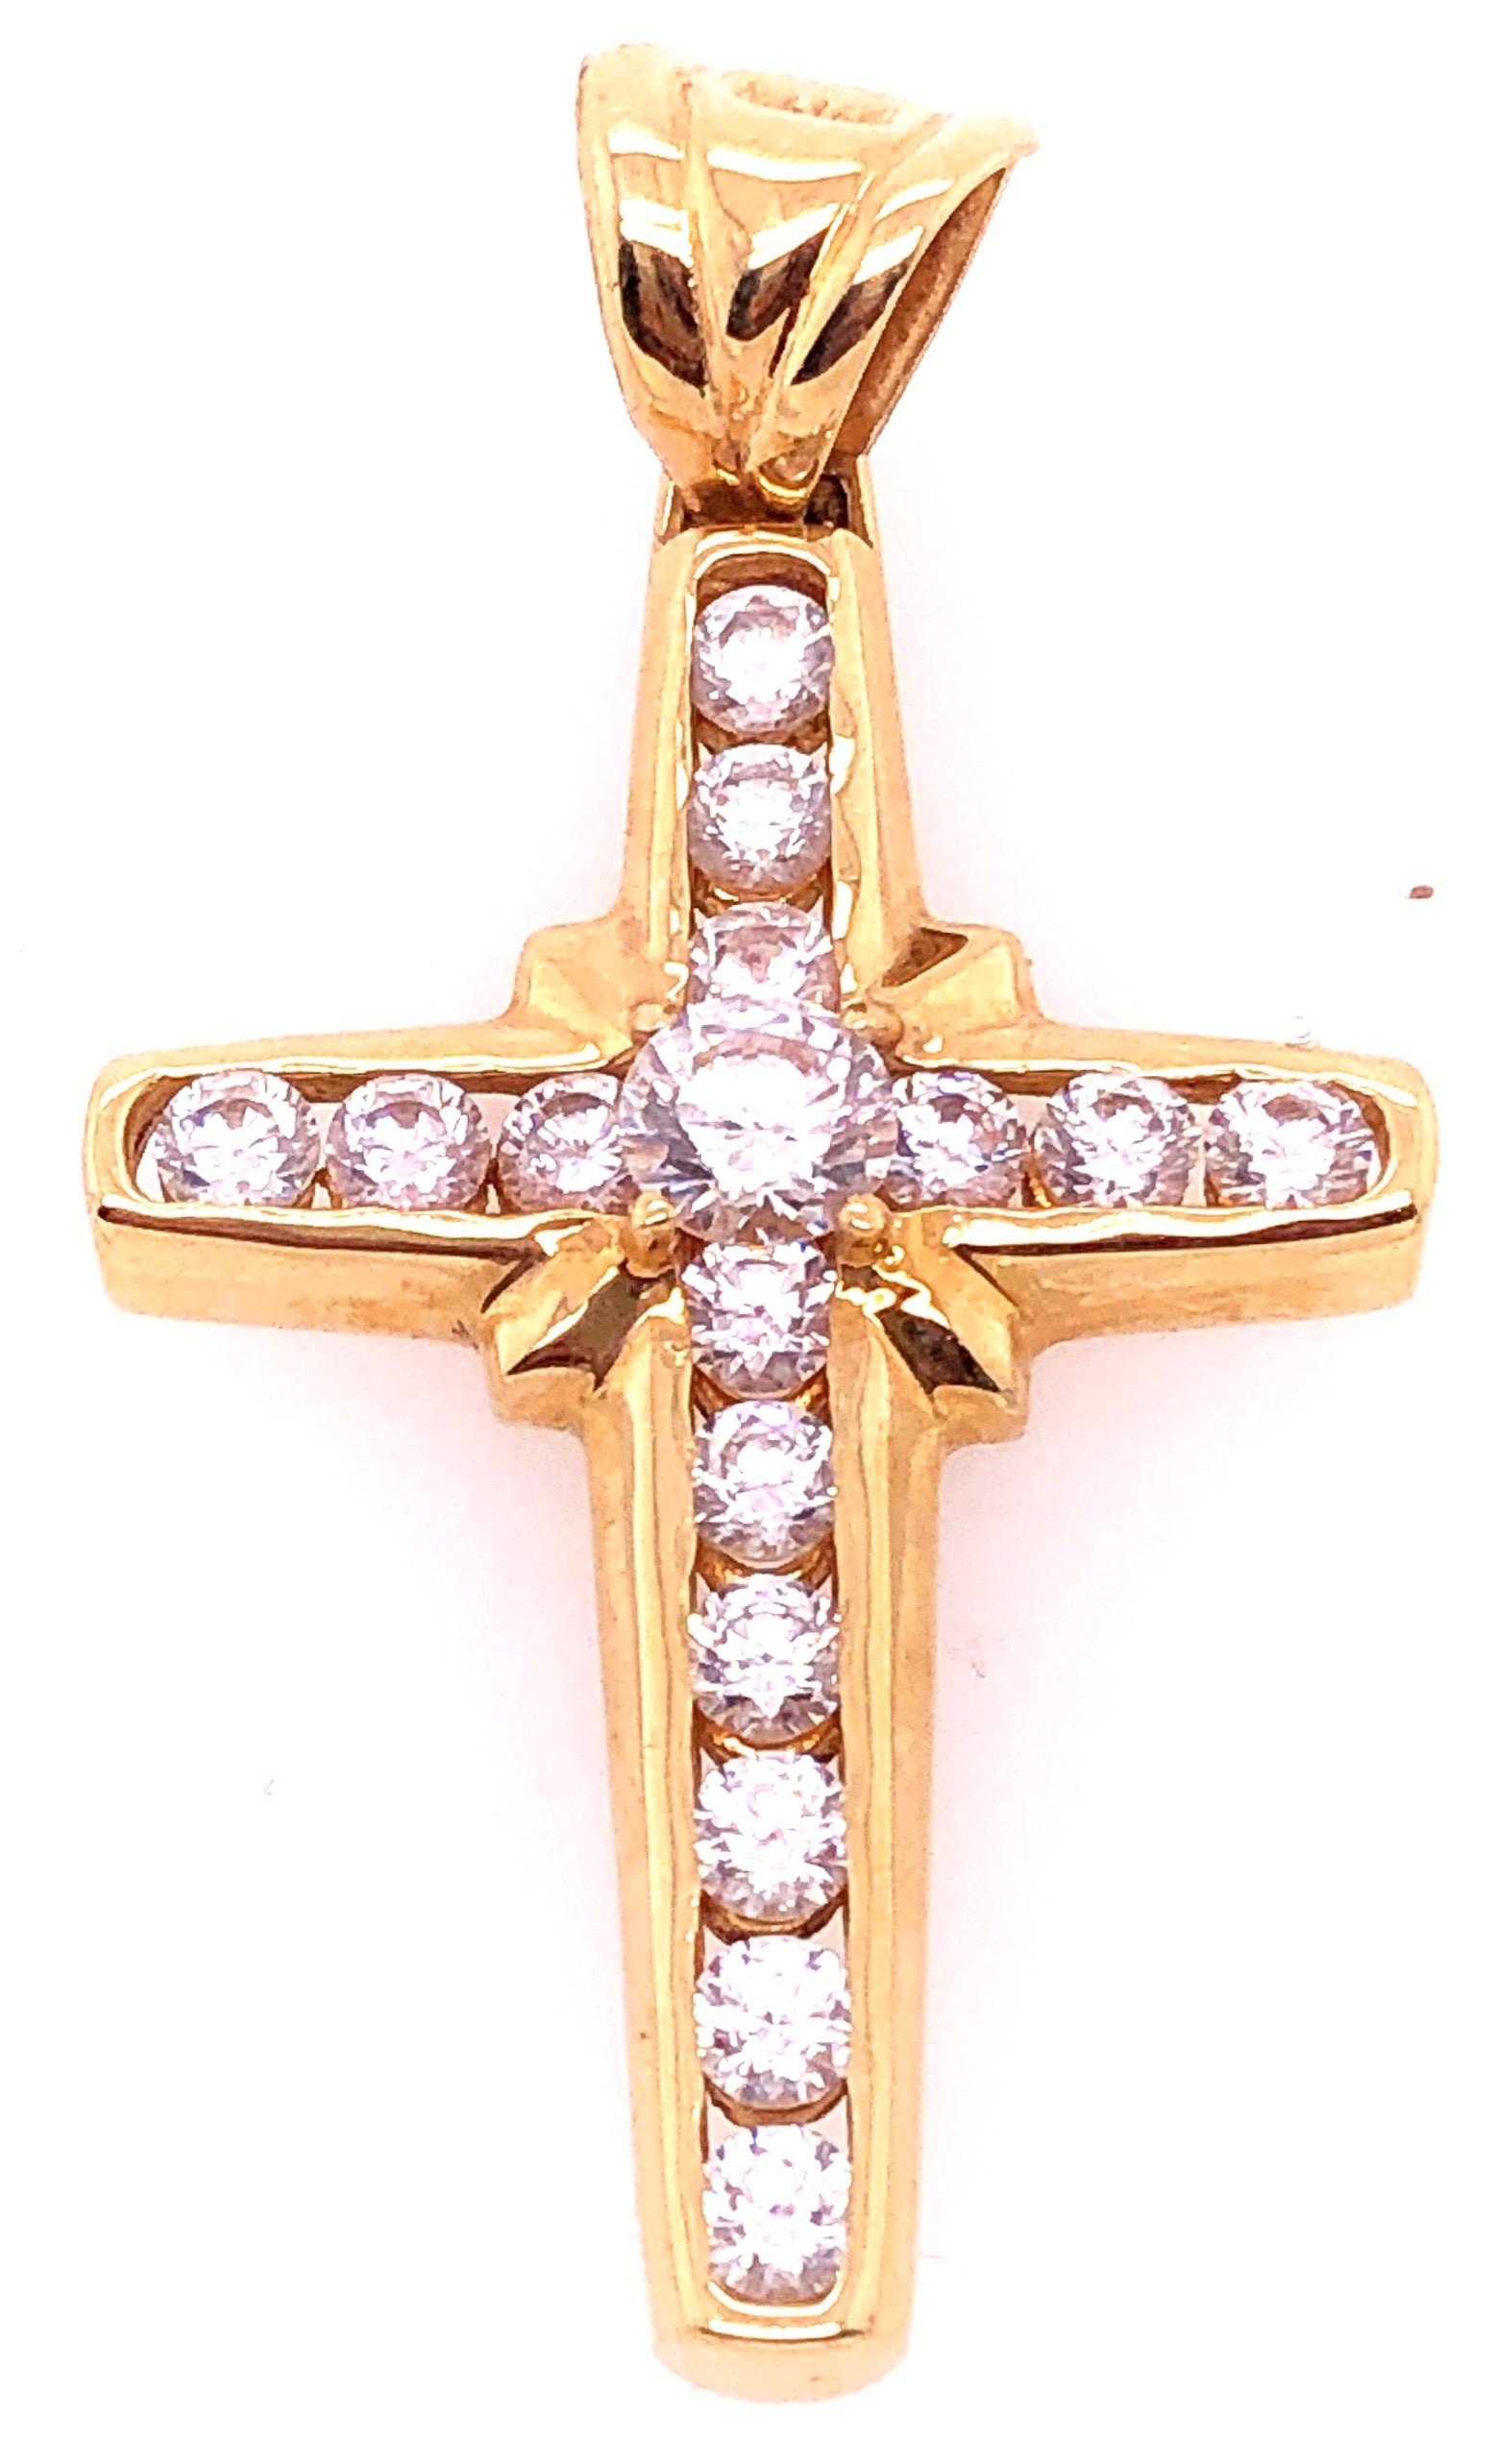 14 Karat Yellow Gold Religious / Crucifix Pendant with Semi Precious Stones.
5 grams total weight.
43.63 mm height.